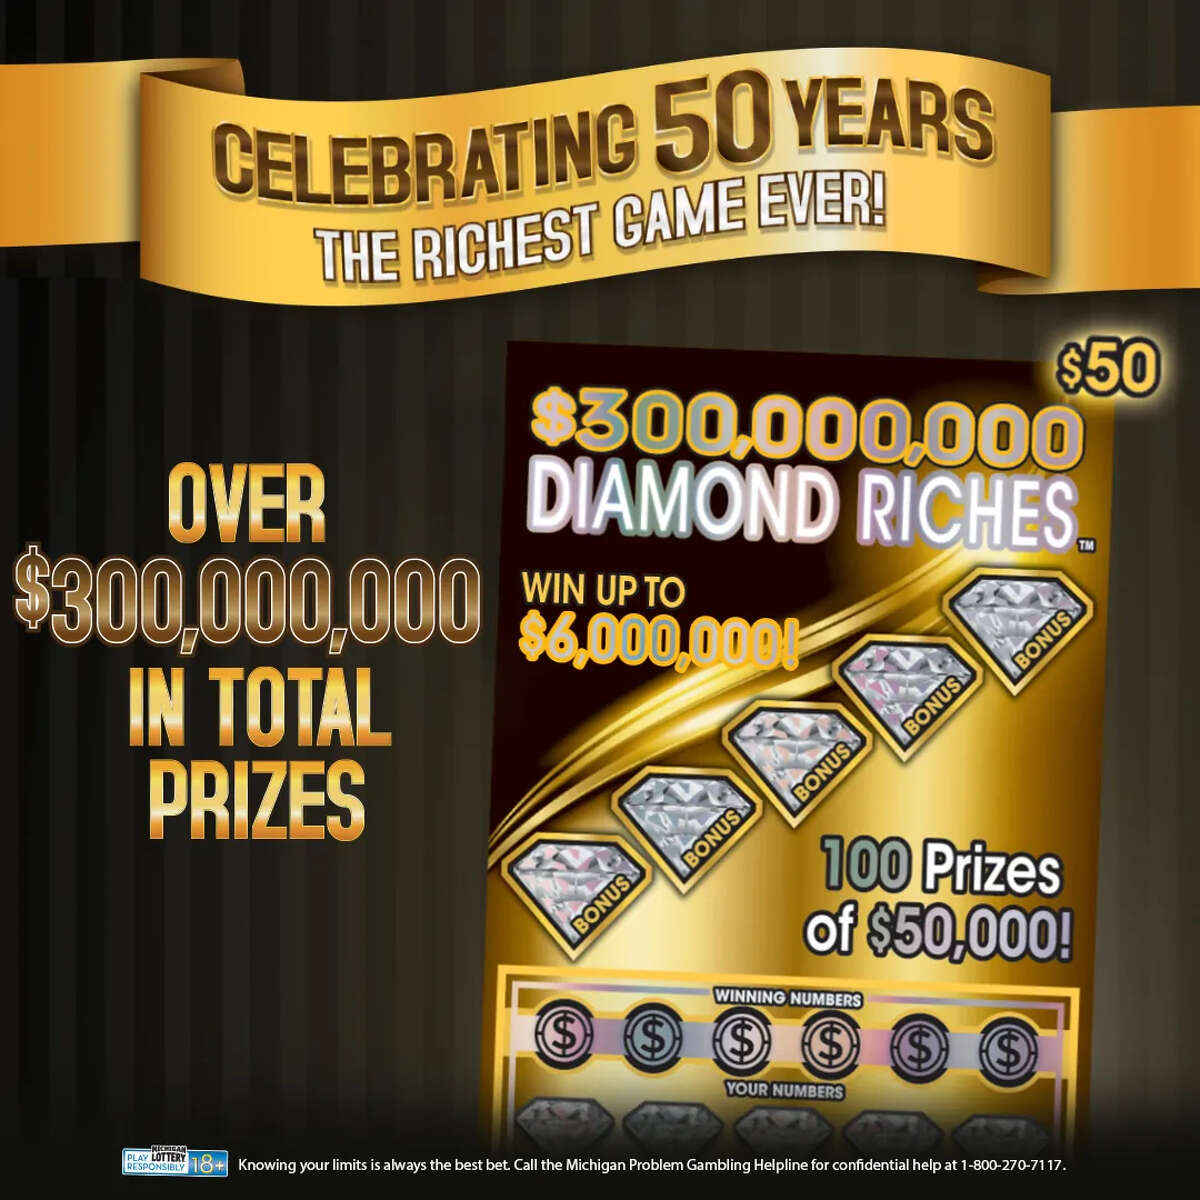 Michigan Lottery is celebrating its 50th anniversary by unveiling its richest instant ticket yet.